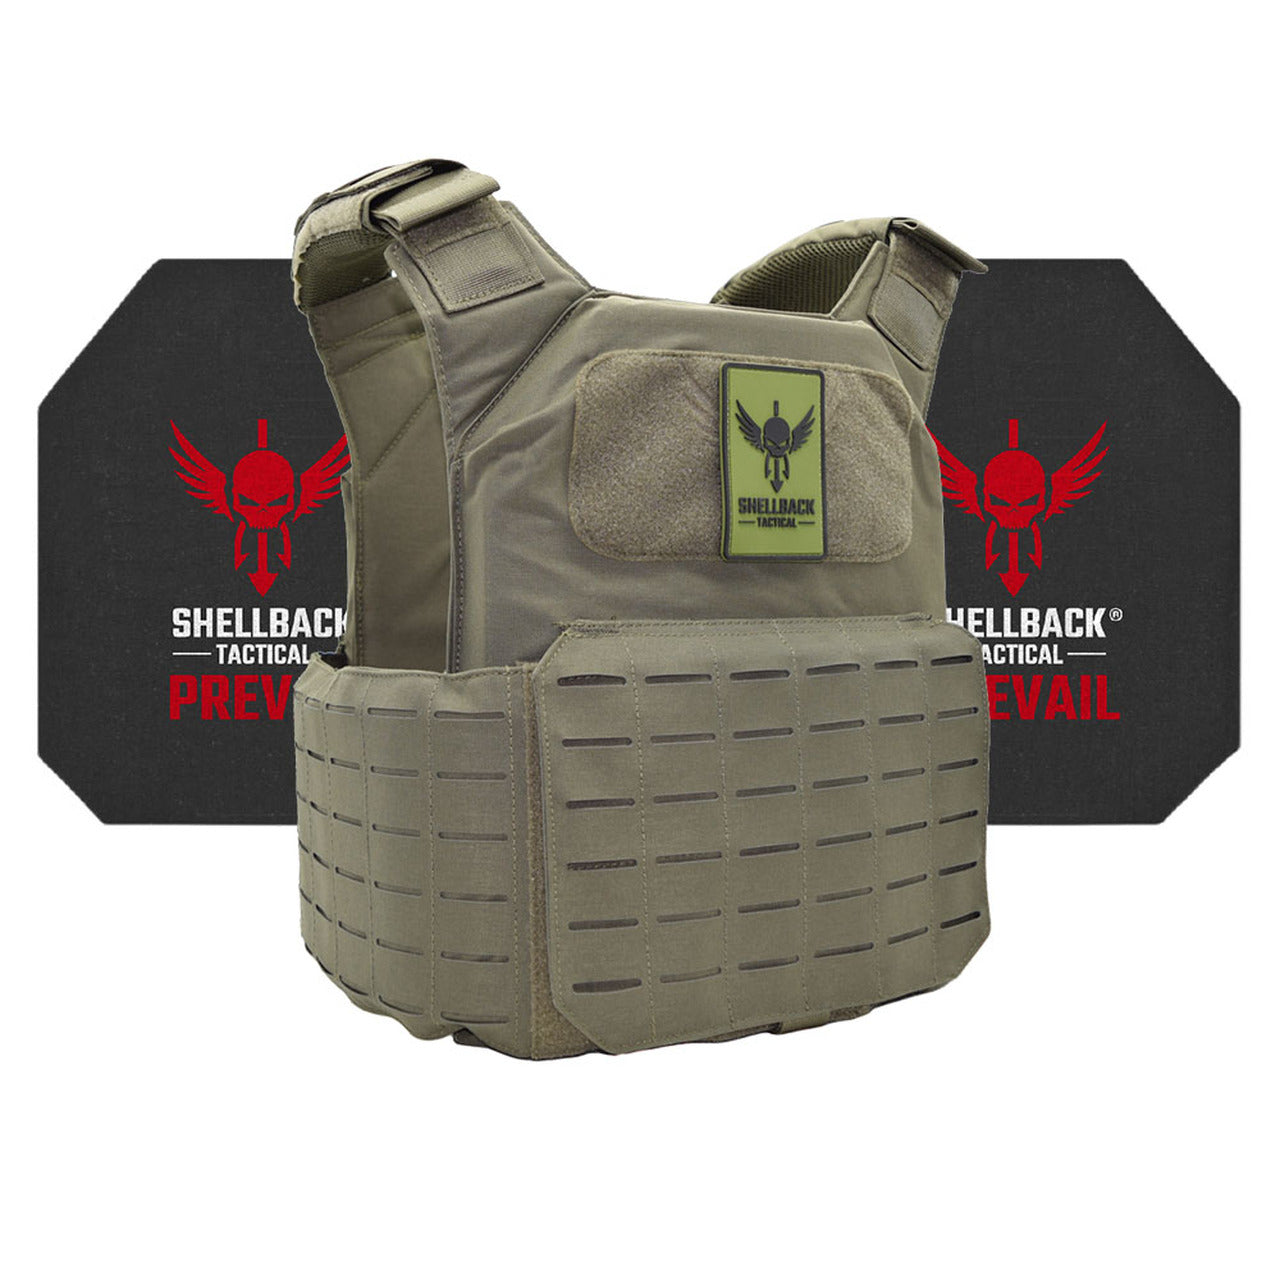 A Shellback Tactical Shield 2.0 Active Shooter Kit with Level IV 4S17 Plates with the Shellback Tactical logo on it.